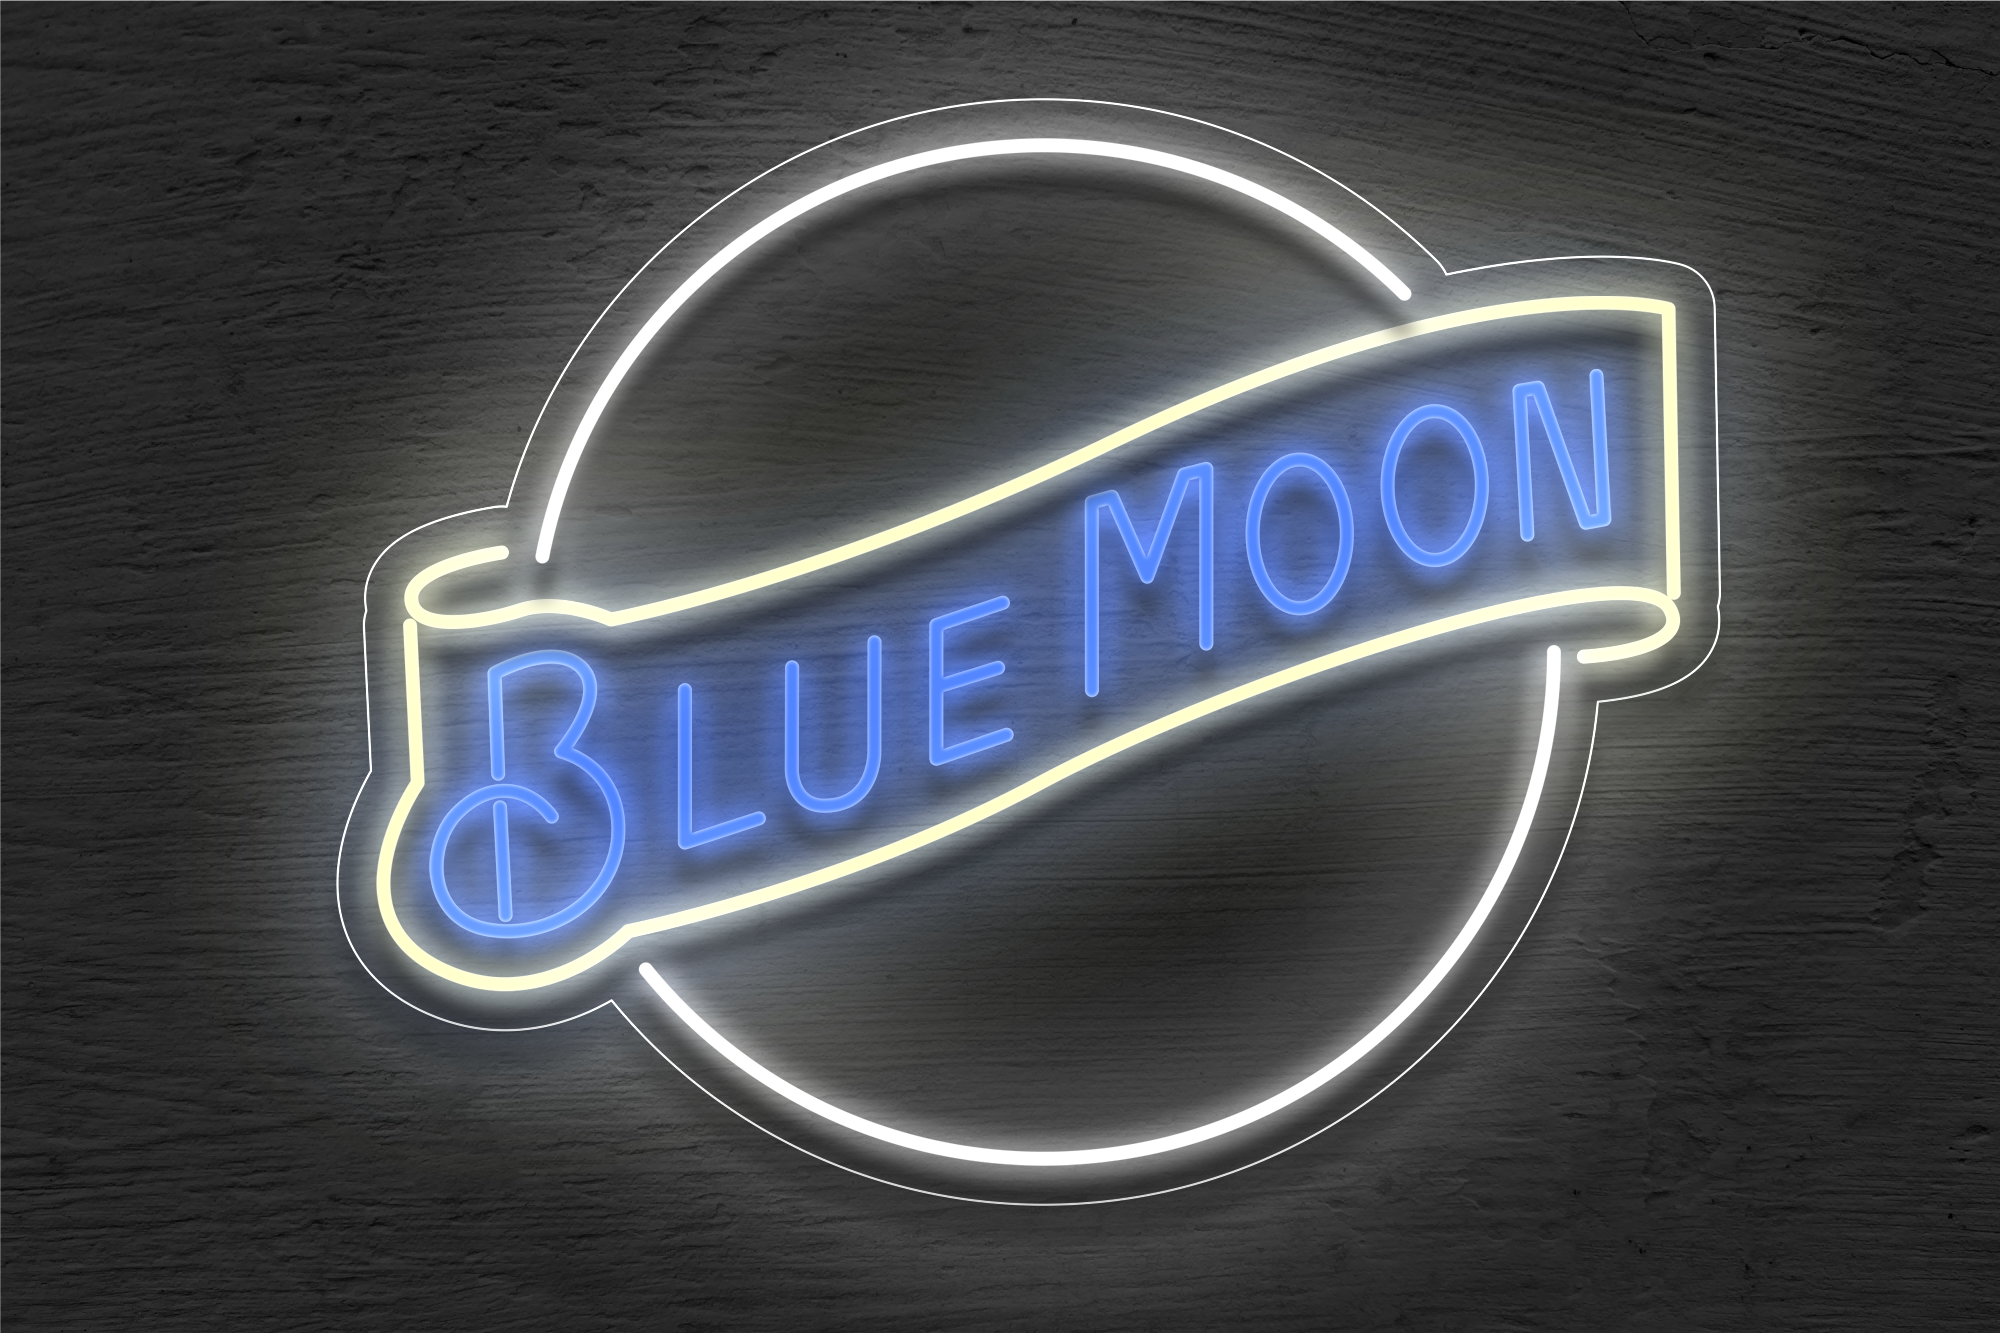 "Bluemoon" with Circle Border LED Neon Sign